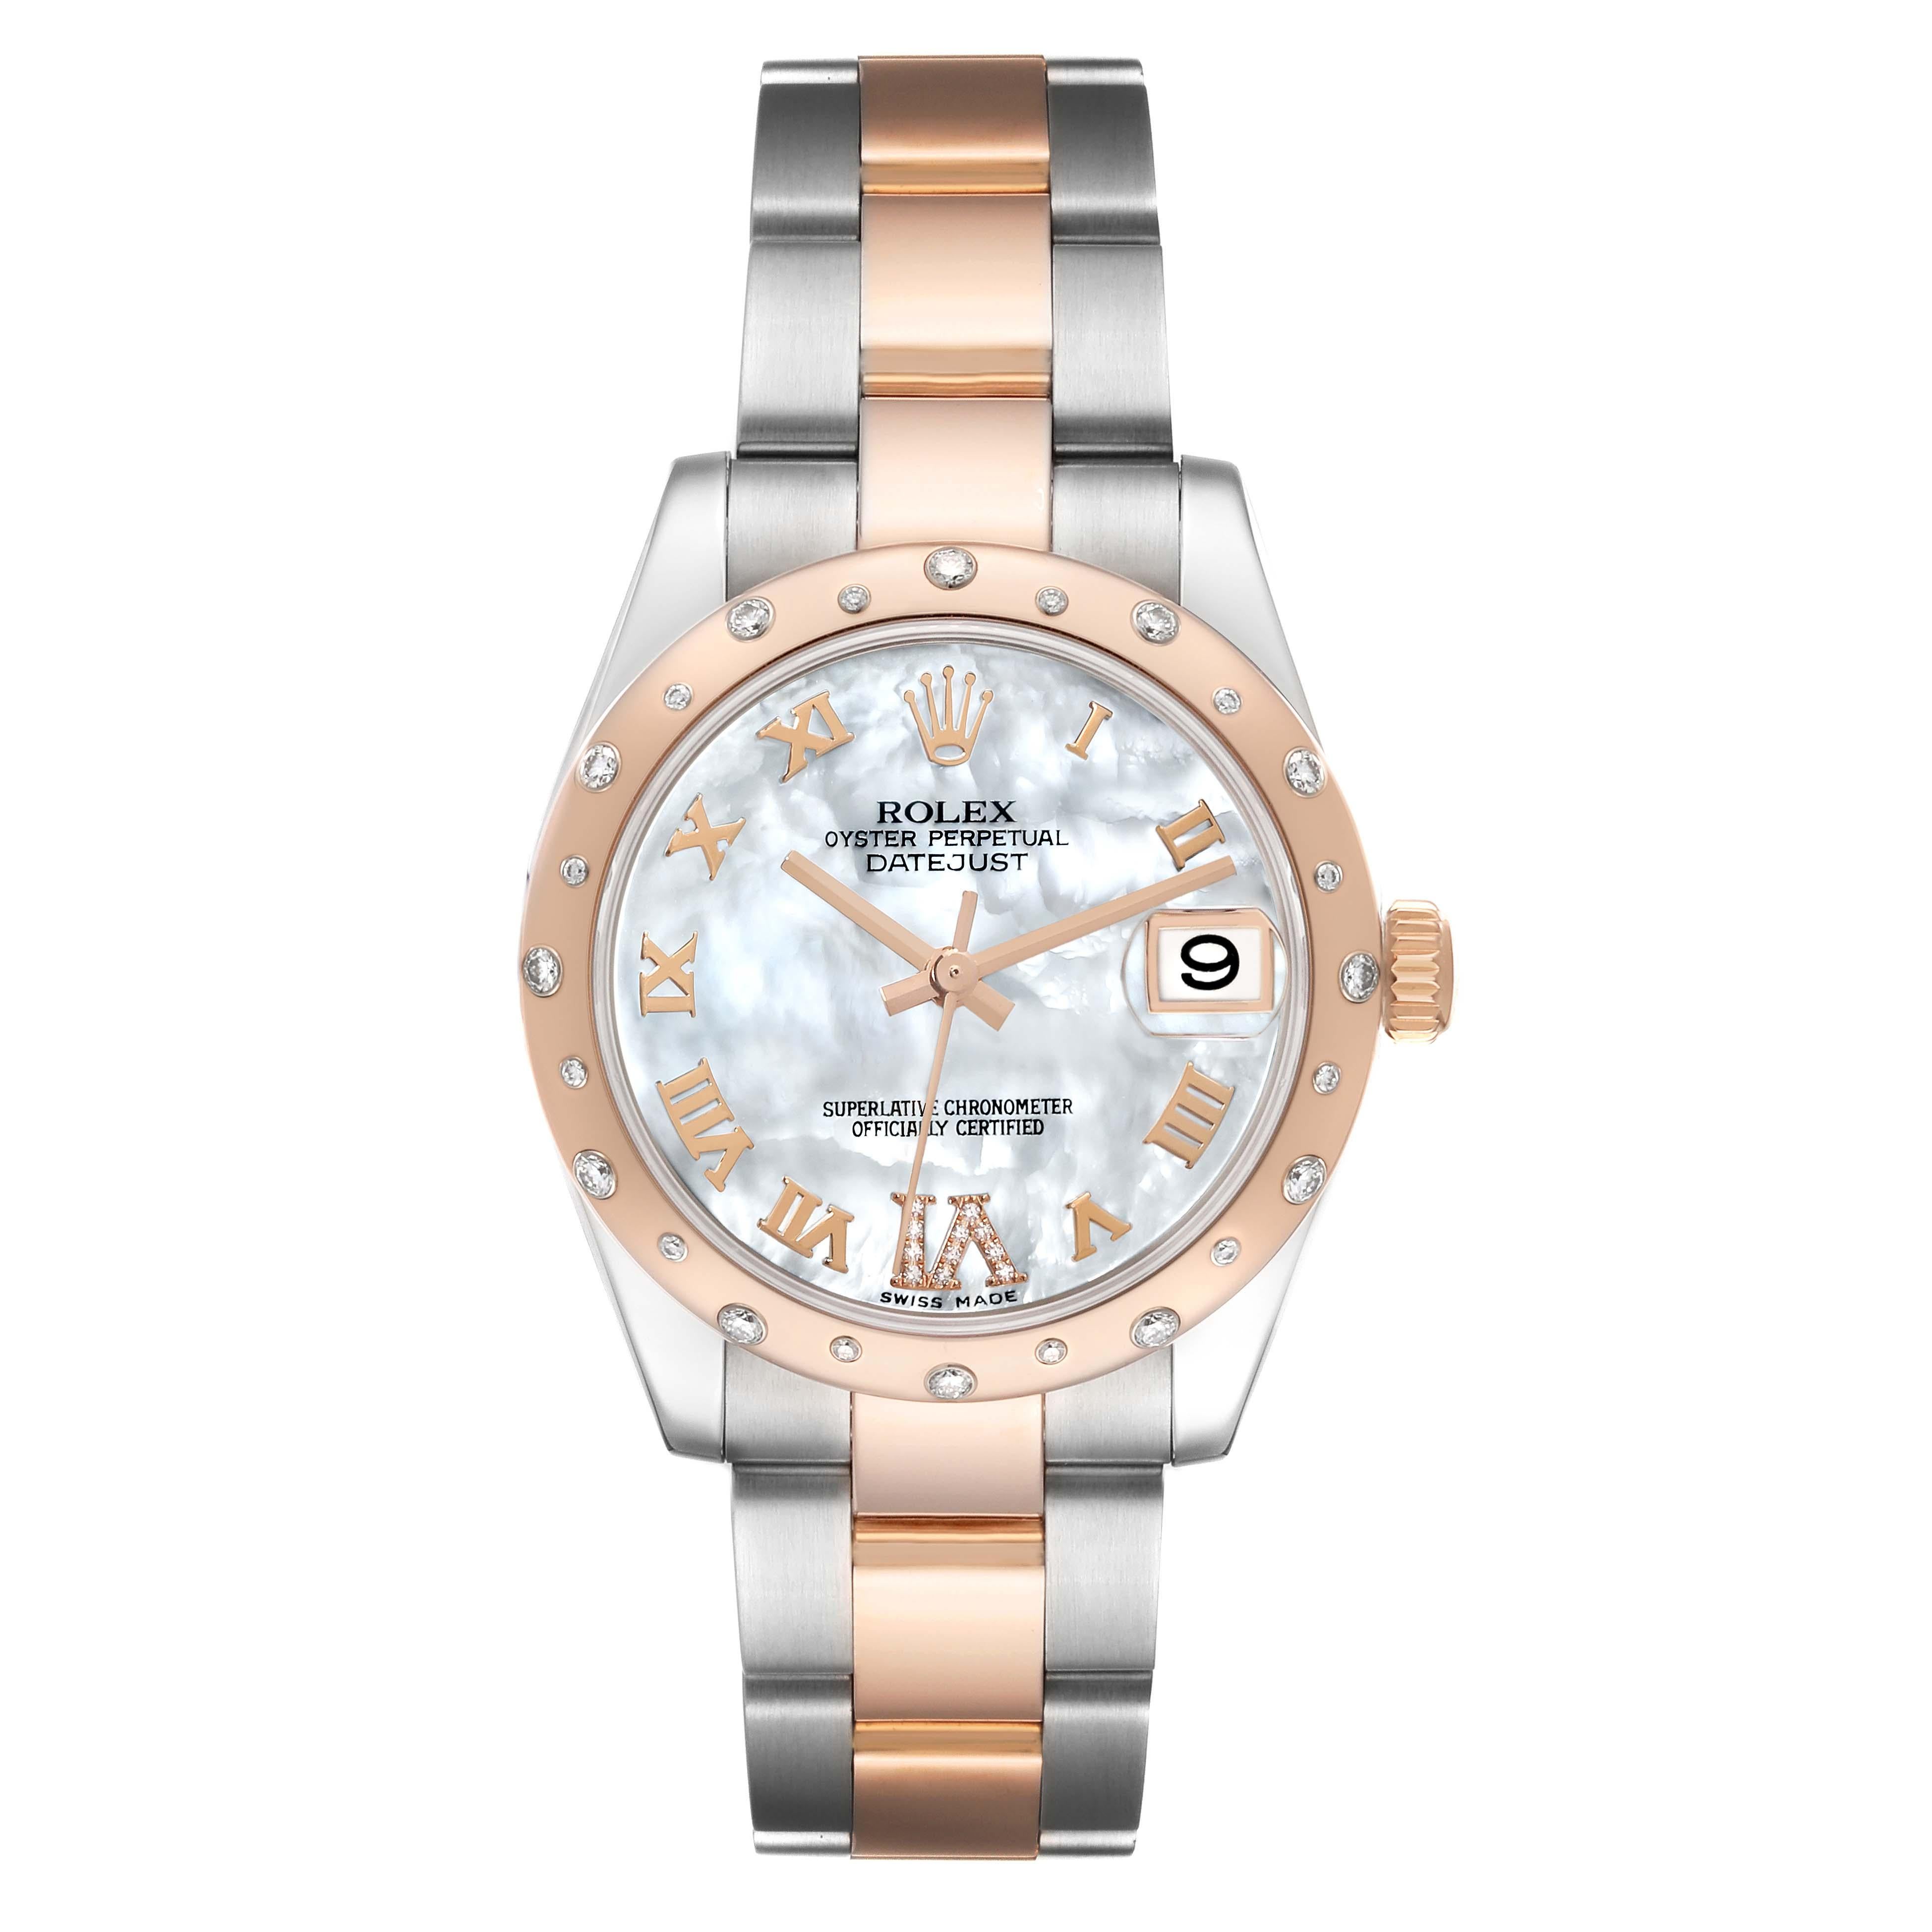 Rolex Datejust 31 Midsize Steel Rose Gold Diamond Ladies Watch 178341. Officially certified chronometer automatic self-winding movement. Stainless steel and 18k rose gold oyster case 31 mm in diameter. Rolex logo on a crown. 18K rose gold smooth